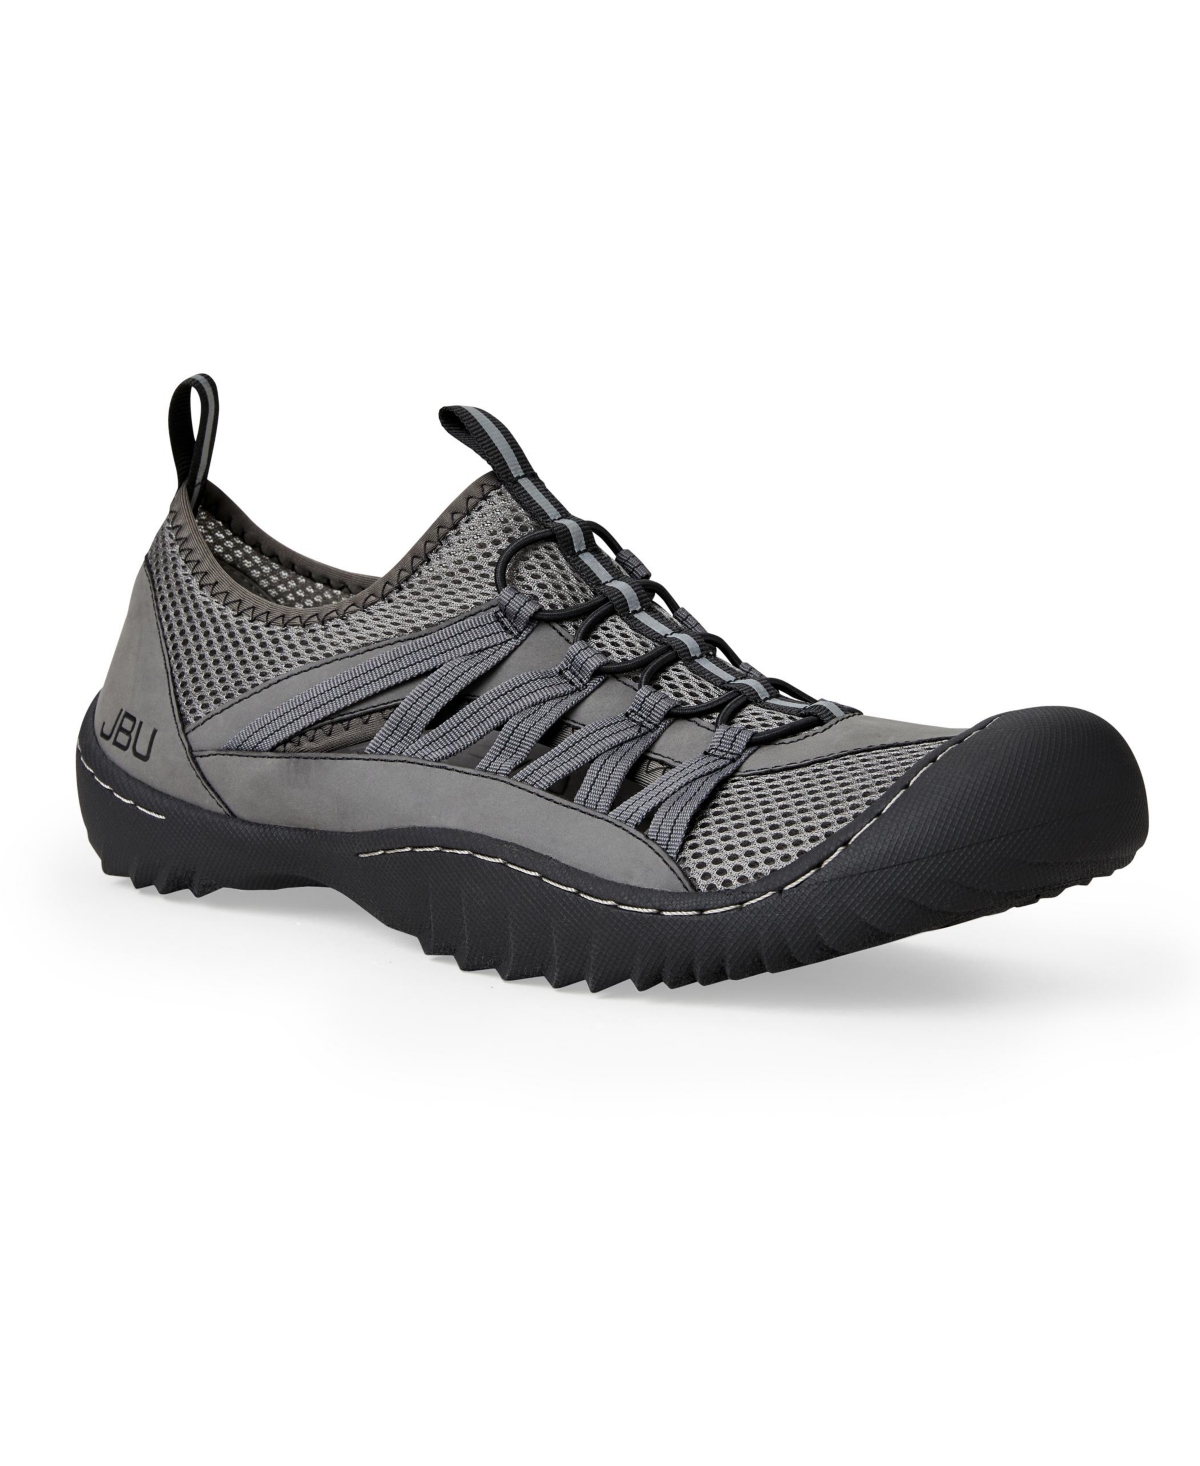 Men's Topsail Water Shoes - Gray